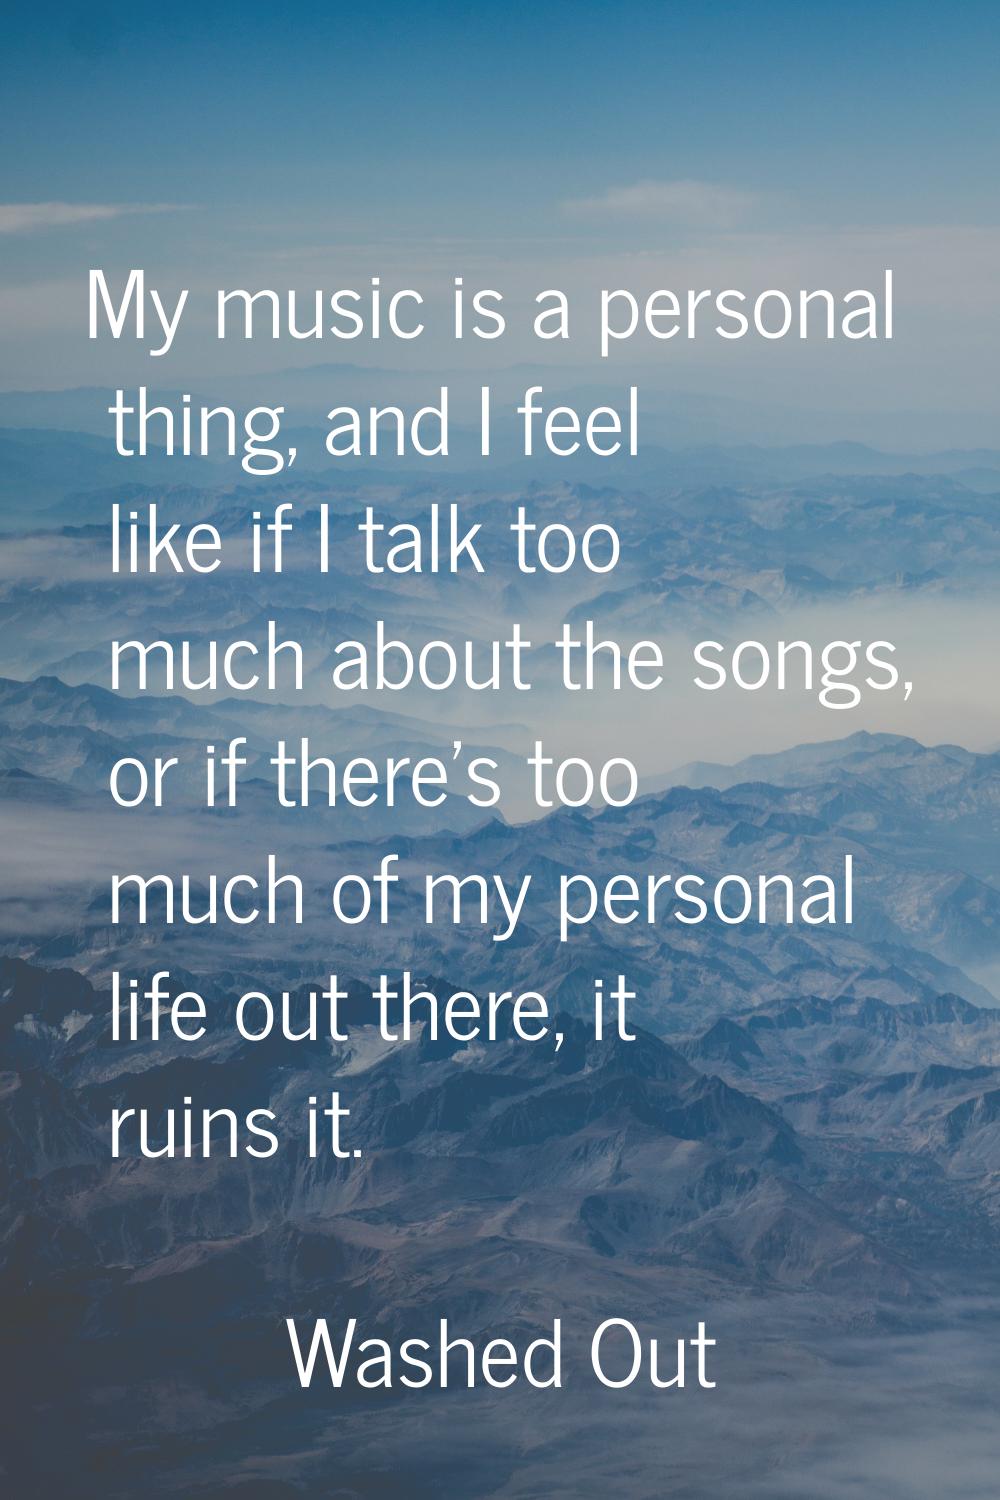 My music is a personal thing, and I feel like if I talk too much about the songs, or if there's too